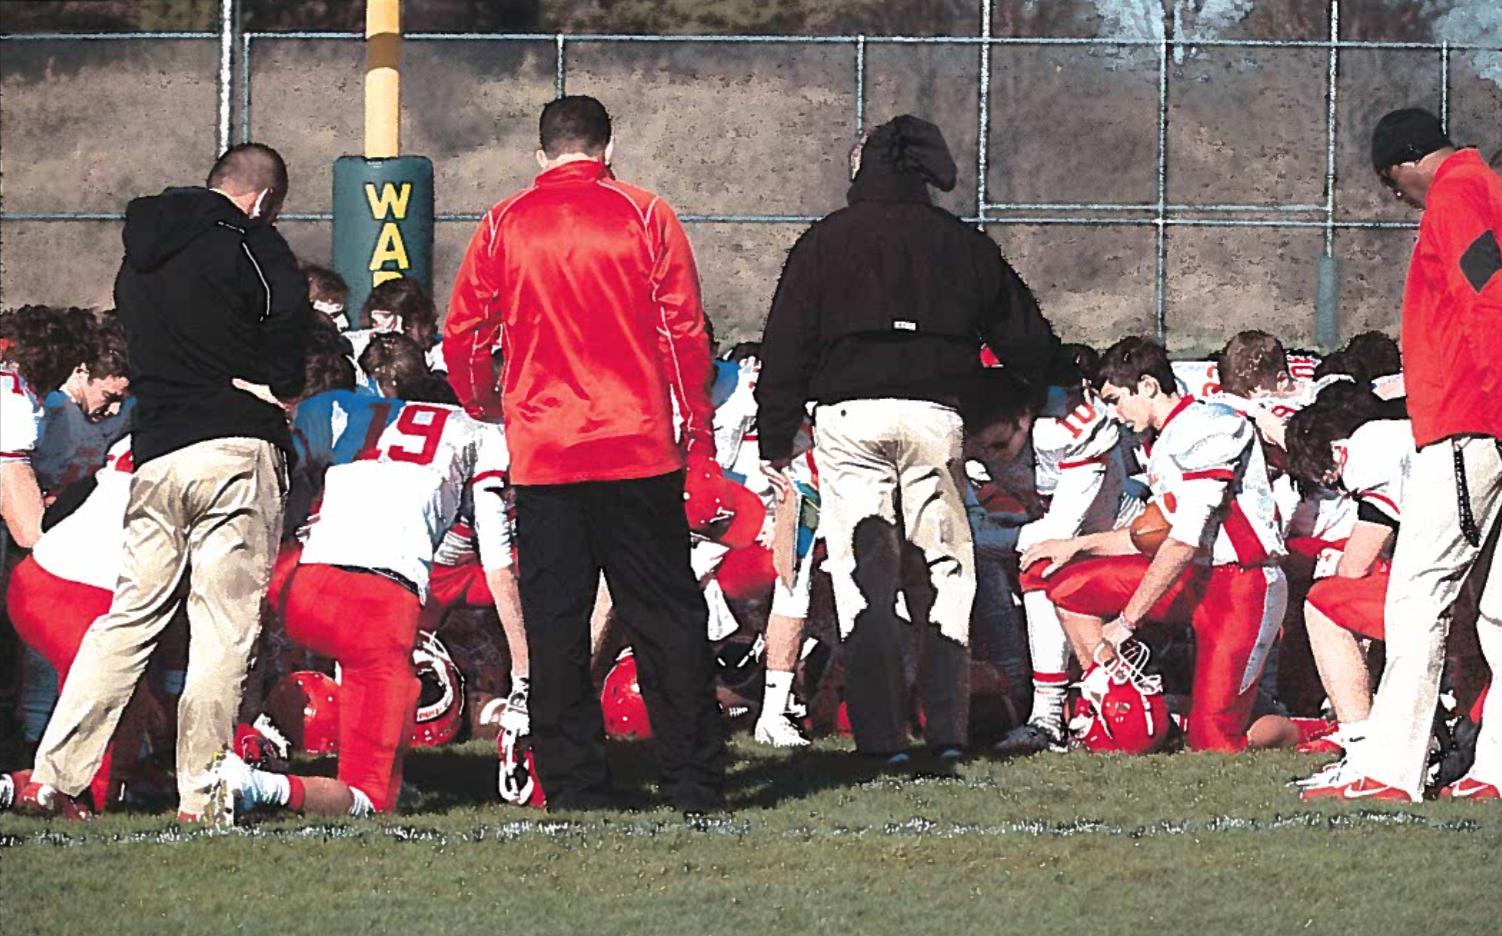 Illinois High School Football Coach Promises Not to Lead or Participate in Prayer with Athletes